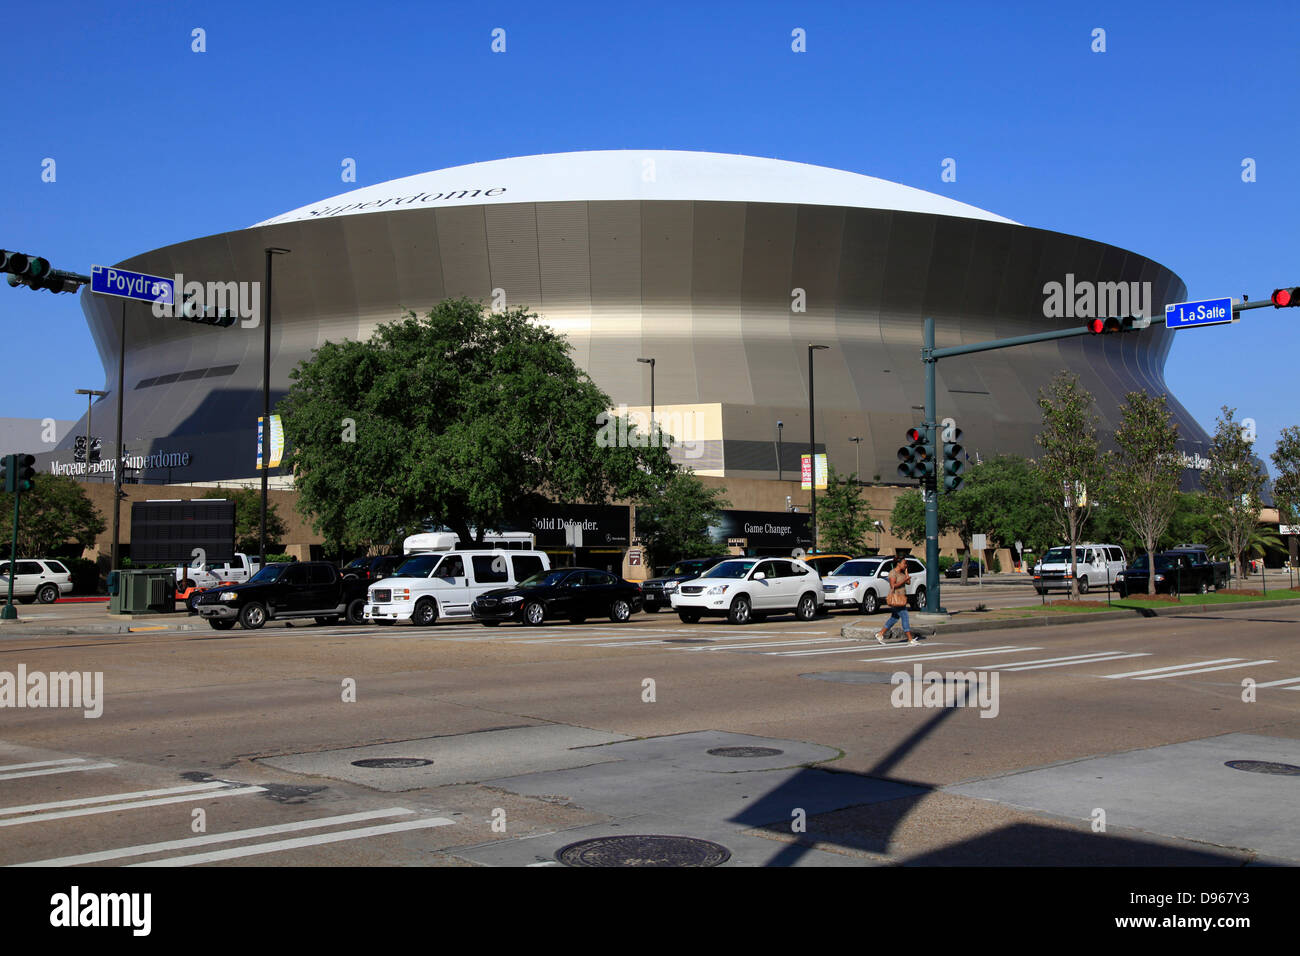 A really gigantic gymnasium is the Superdom of New Orleans.  It has about 95.000 places. Since October 23, 2011, the Superdom is renamed to Mercedes-Benz Superdom. The native football-team New Orleans Saints plays in the pro-league NFL.  Photo: Klaus Nowot Stock Photo